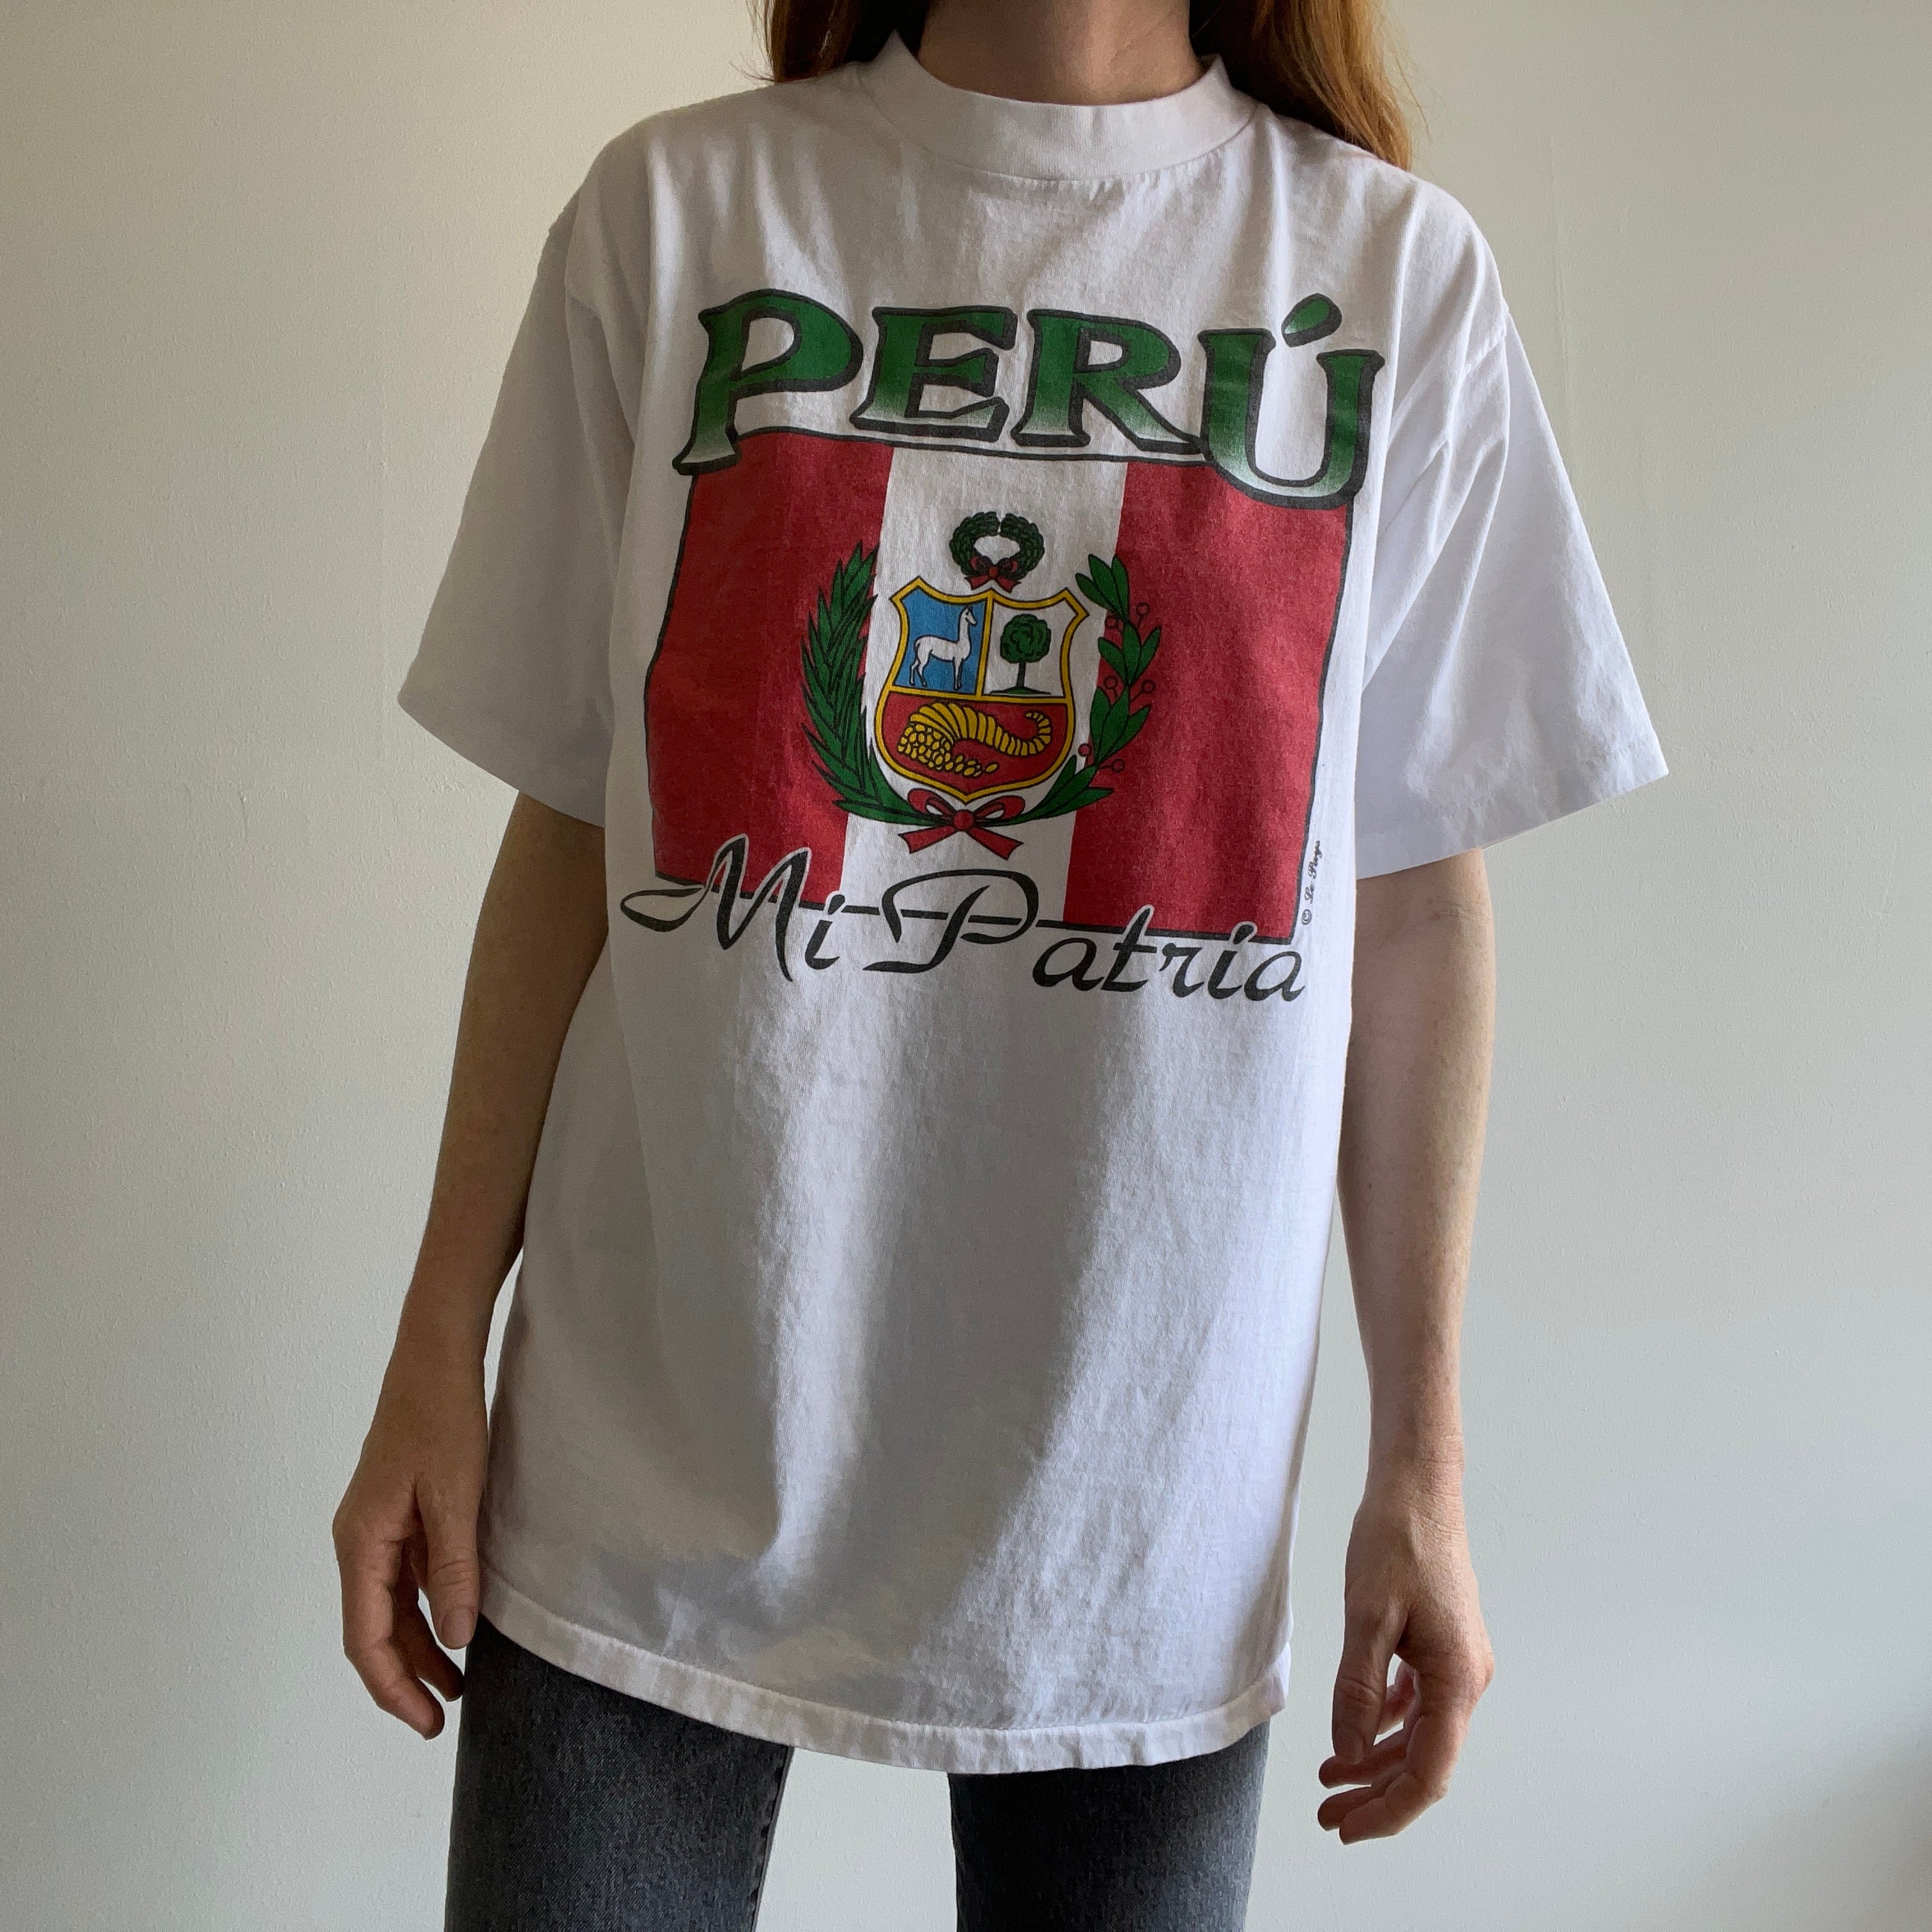 1990s Peru T-Shirt Made in the USA